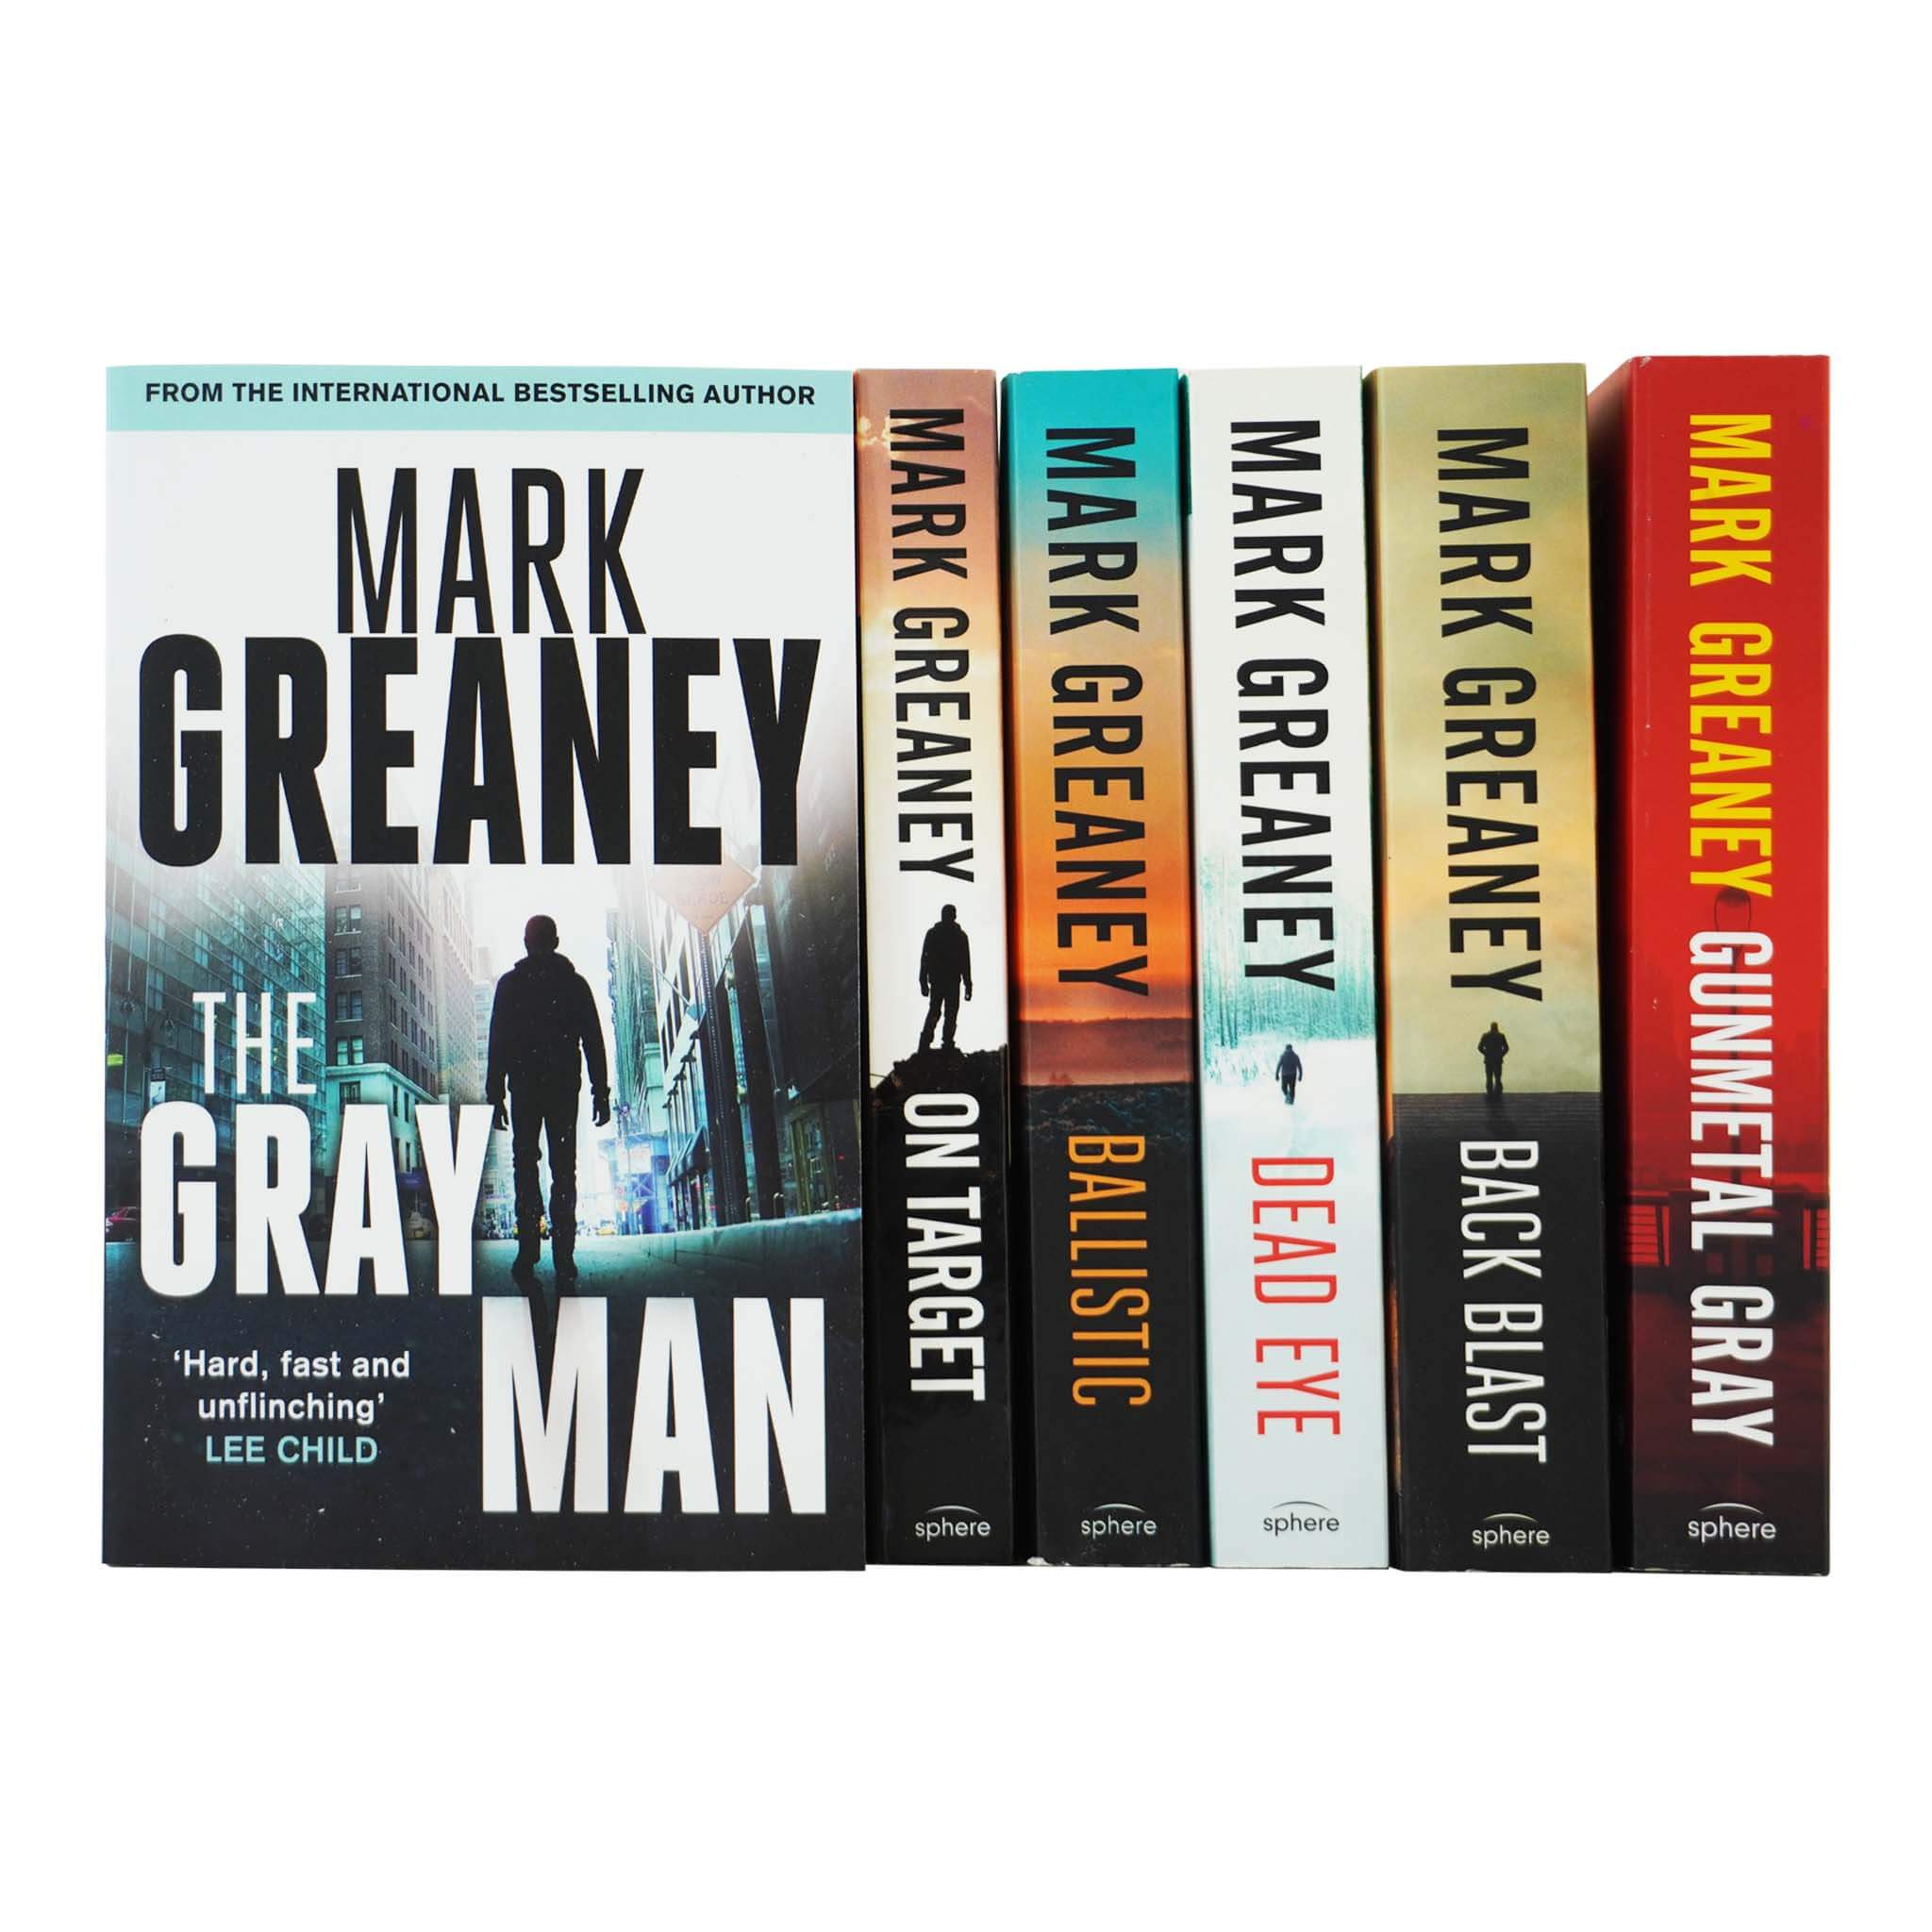 Mark　Greaney　Paperb　Books　Gray　The　by　—　Books2Door　Man　Set　Collection　Fiction